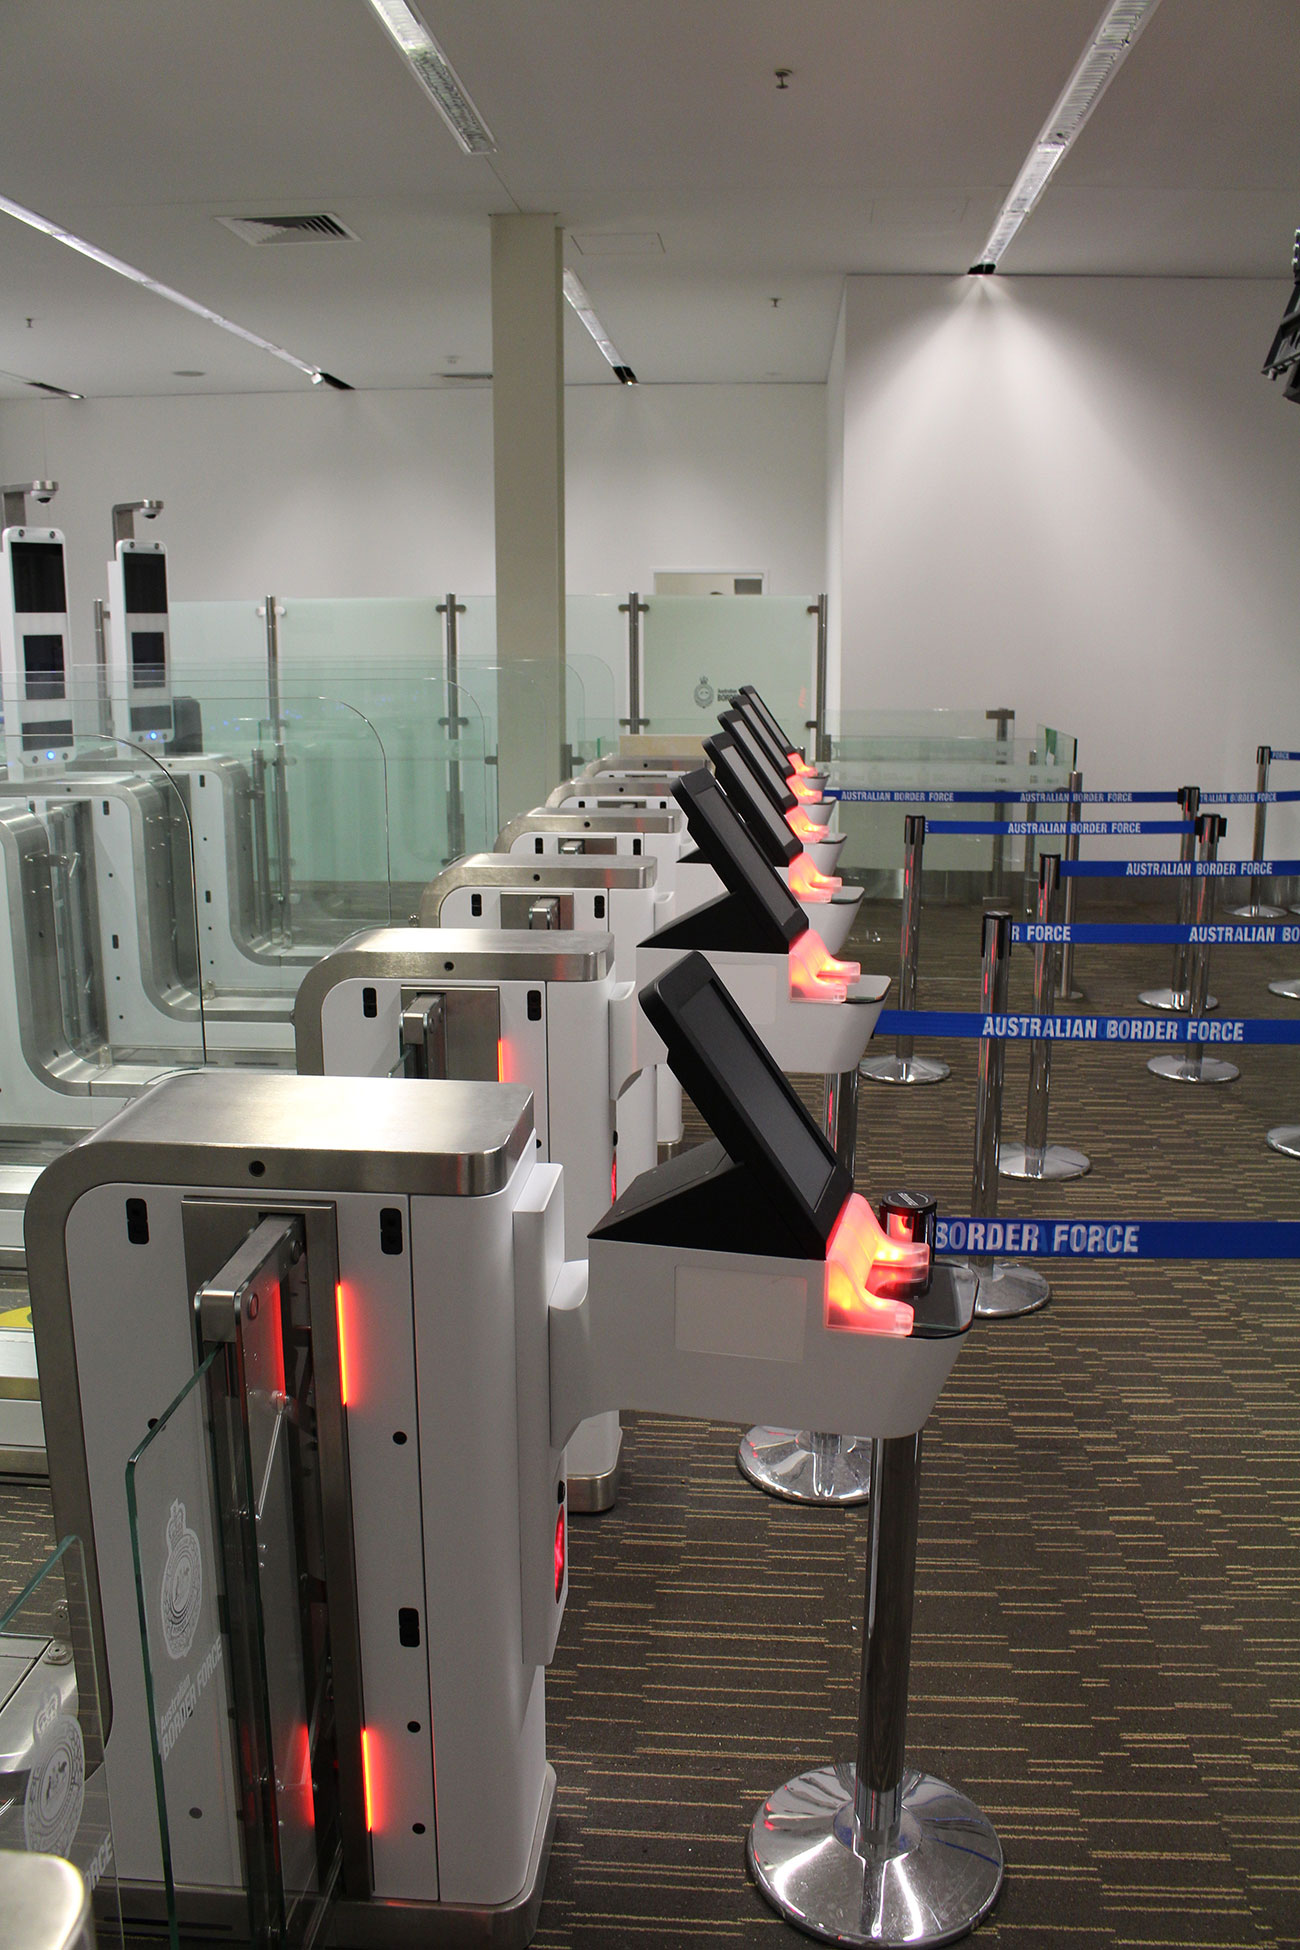 Chappell Adelaide Airport Smart Gates